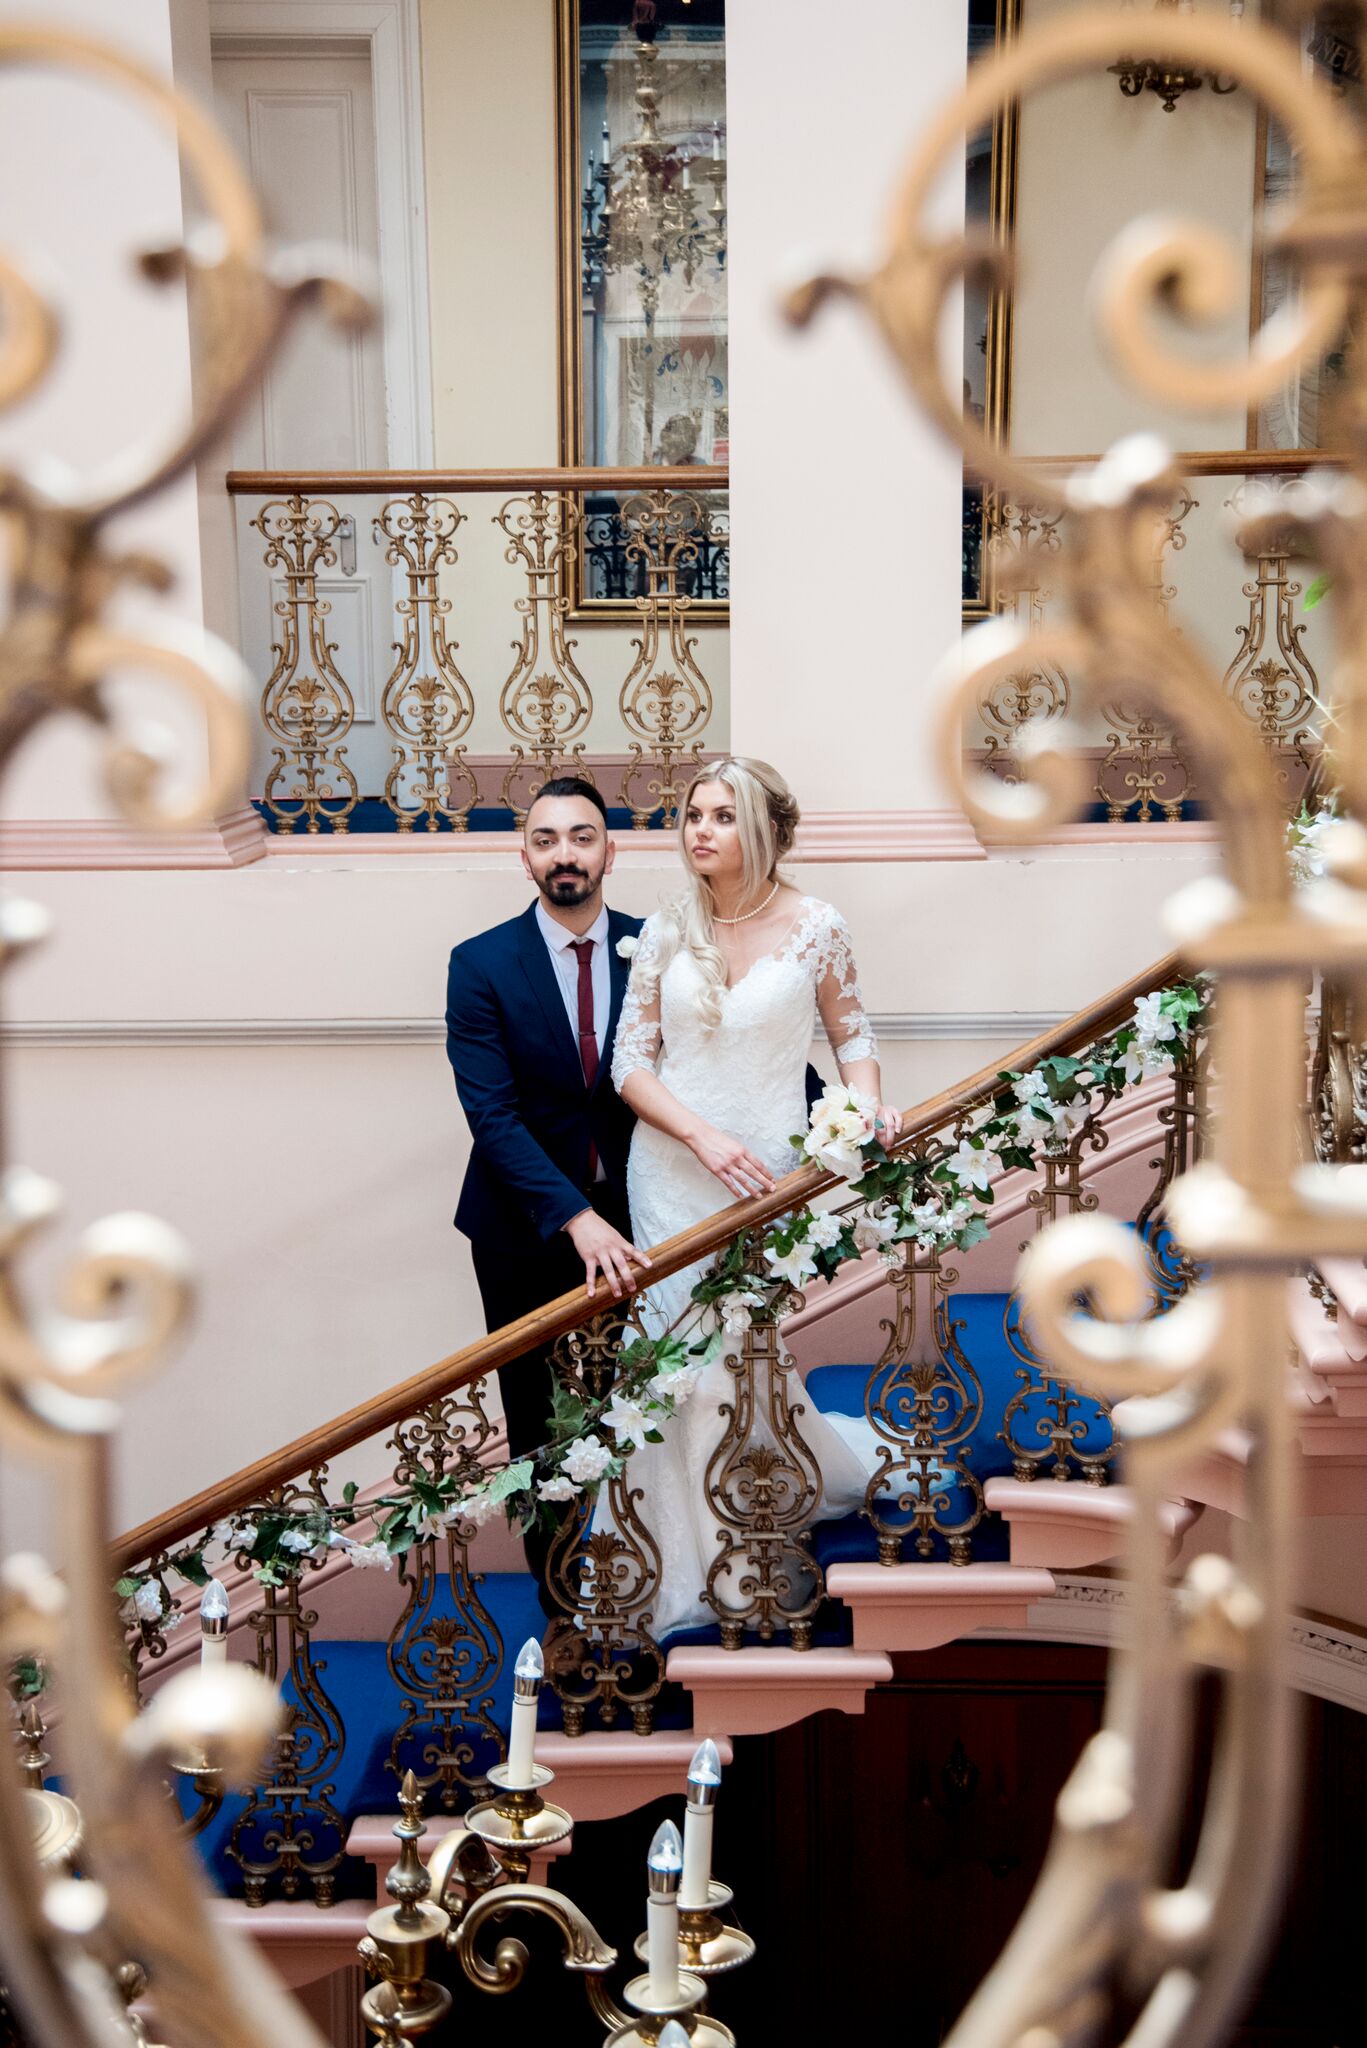 Tapton Hall Photography - Adele Drummond Sophia's Final Touch - Venue Styling - Weddings